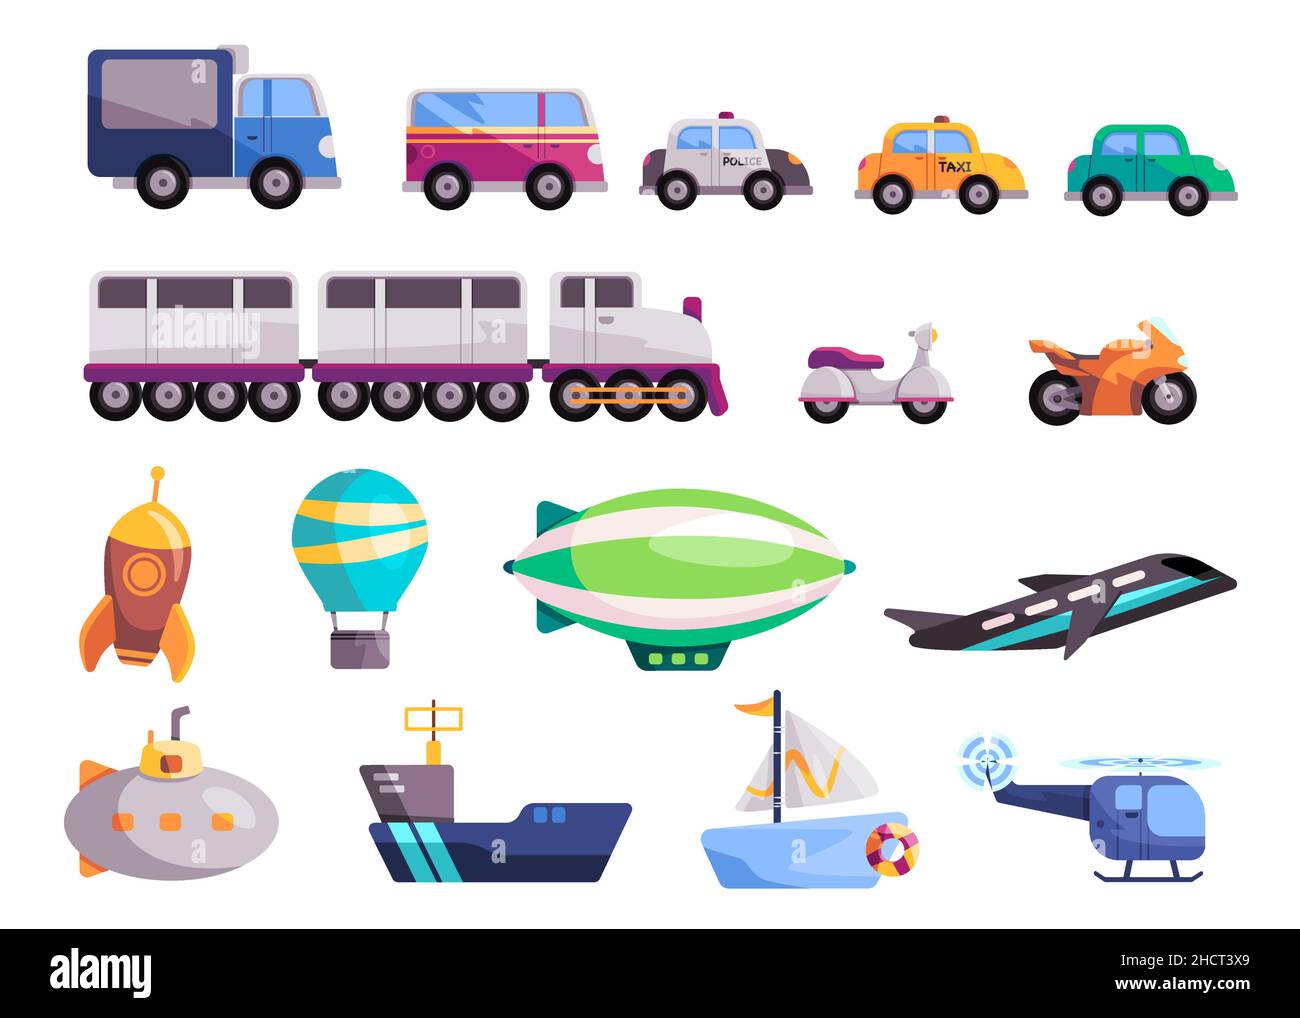 transportation set collection kids fun colorful toys ship boat car bike motor cycle train van helicopter rocket balloon Stock Vector